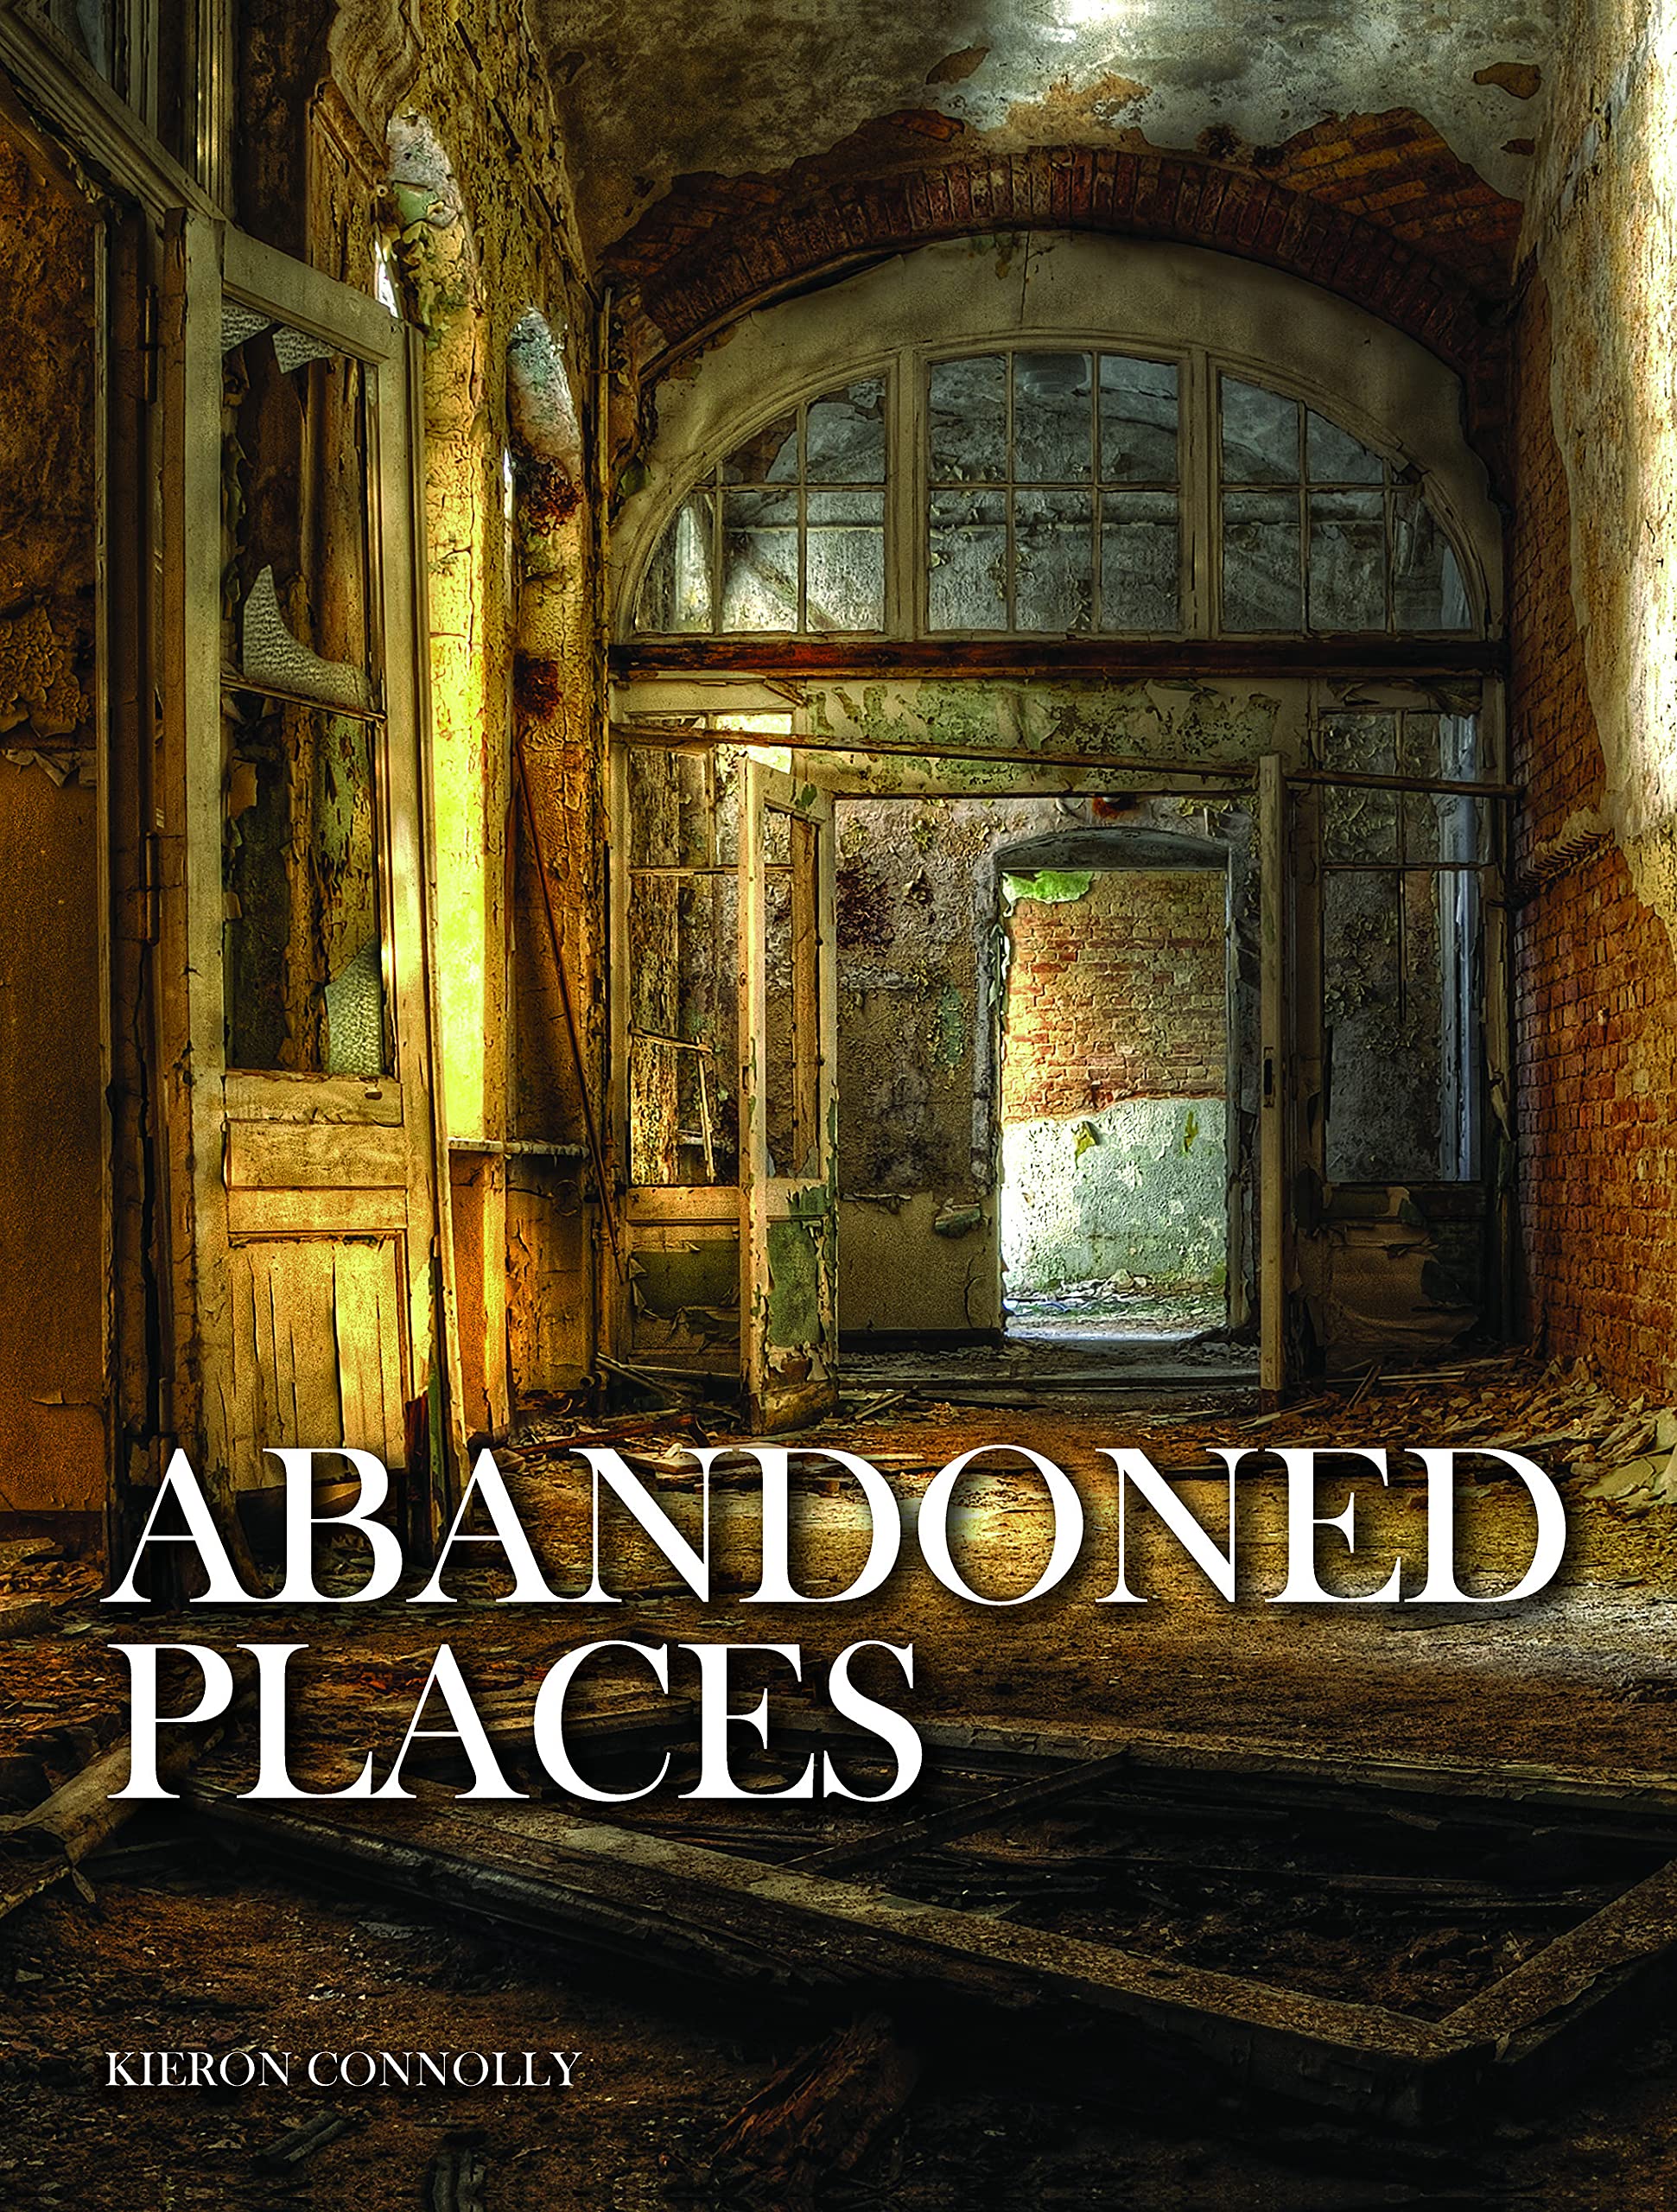 Abandoned Places: A Photographic Exploration of More Than 100 Worlds We Have Left Behind